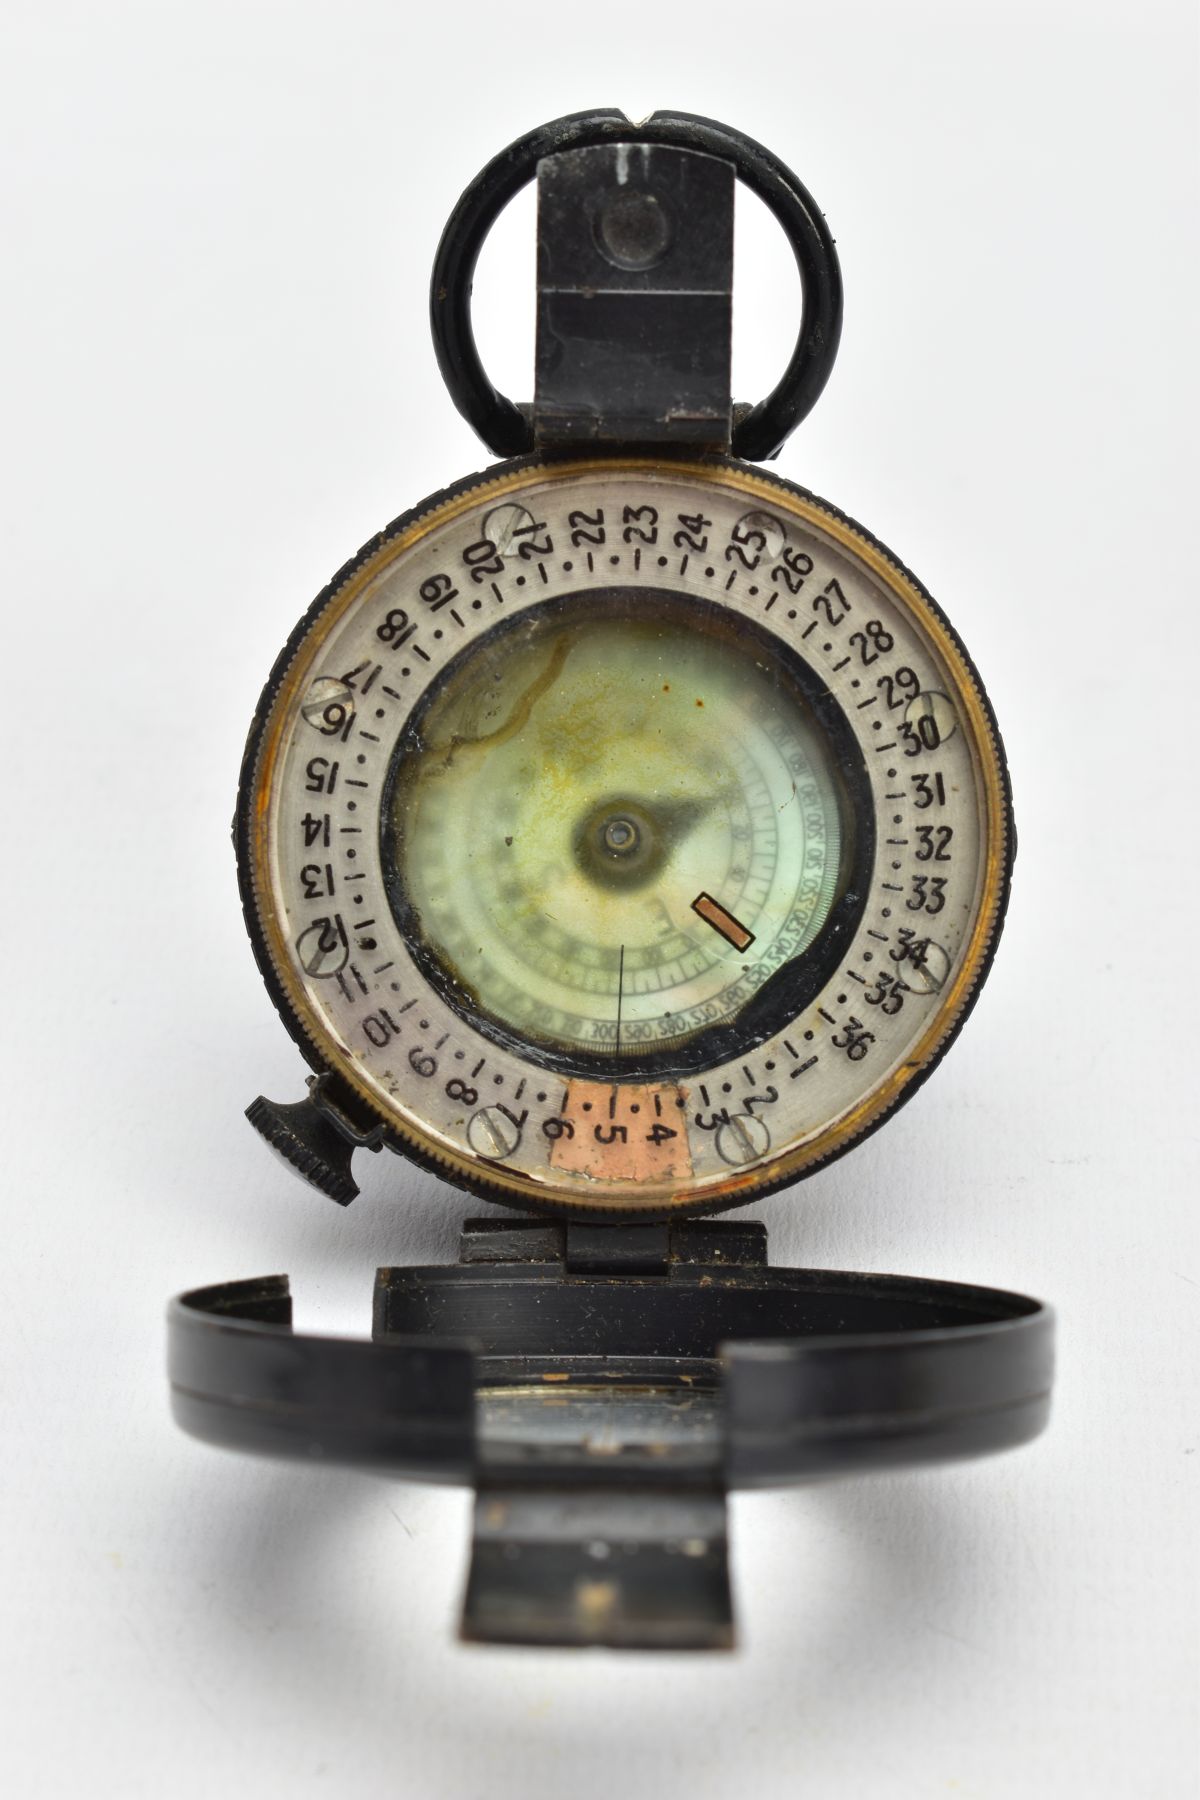 A MILITARY COMPASS, black compass, stamped T.G.C2 Ltd London number 234303, dated 1943 MK III - Image 4 of 7